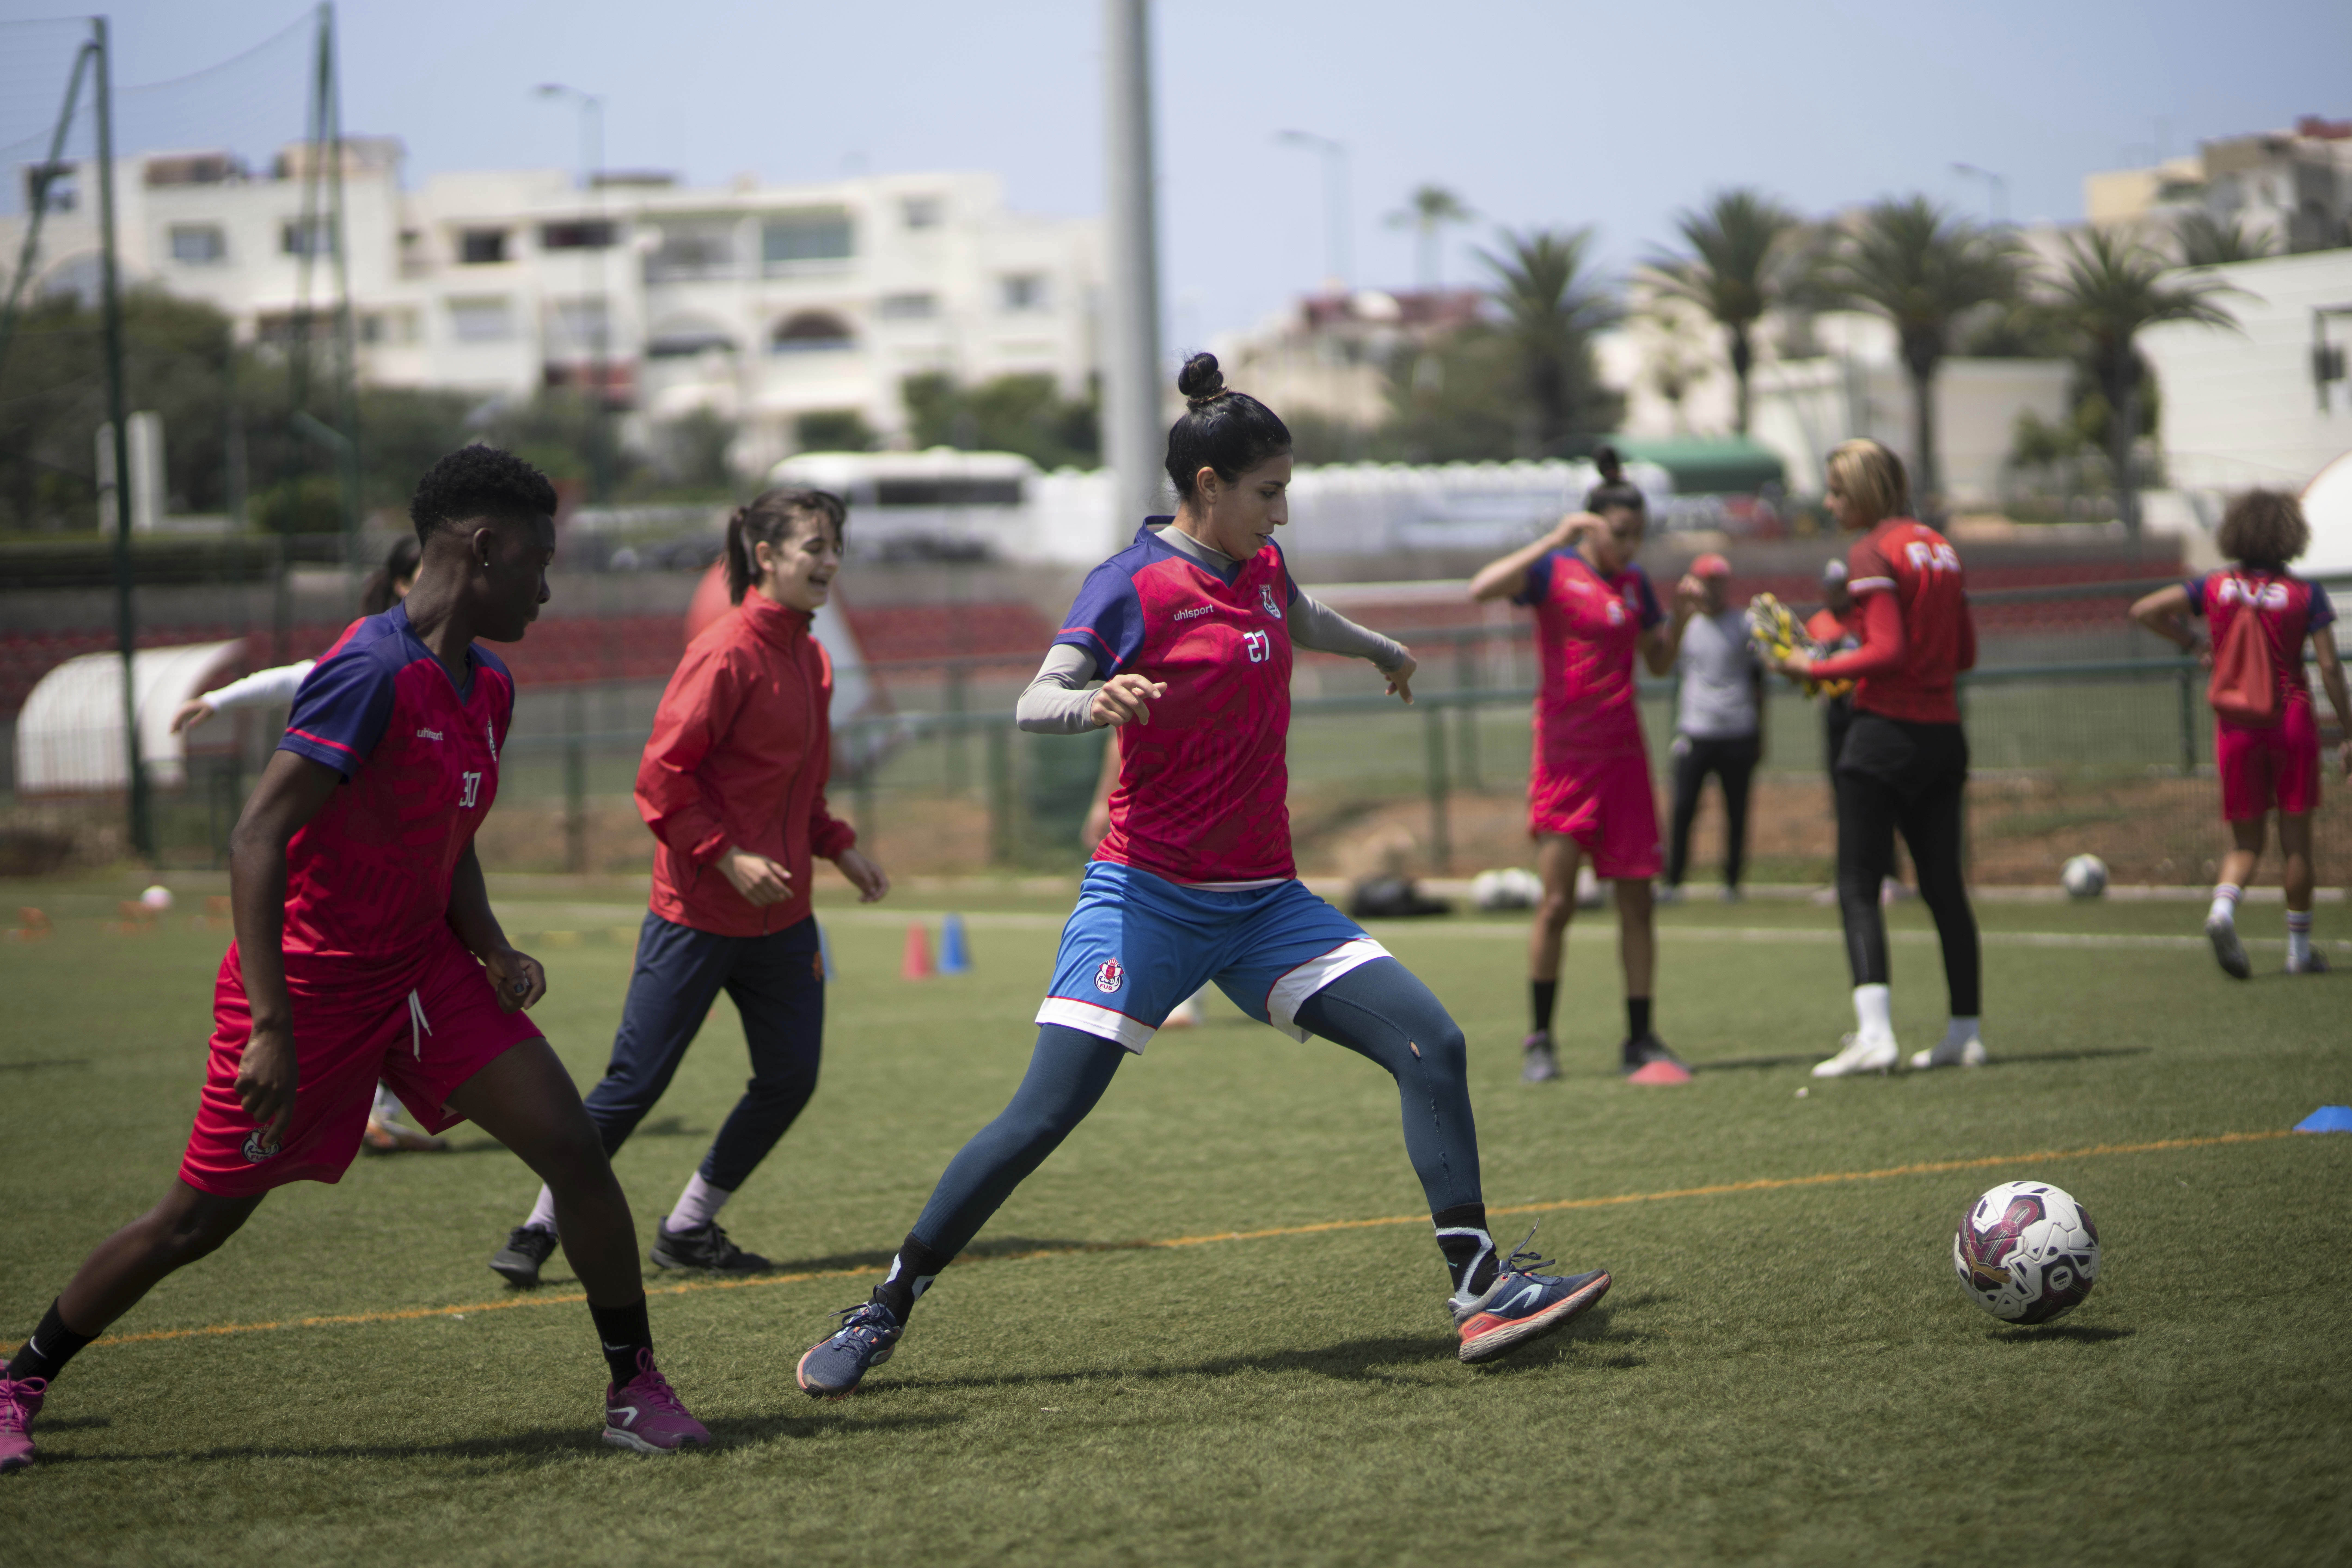 Morocco's historic Women's World Cup performance inspires girls